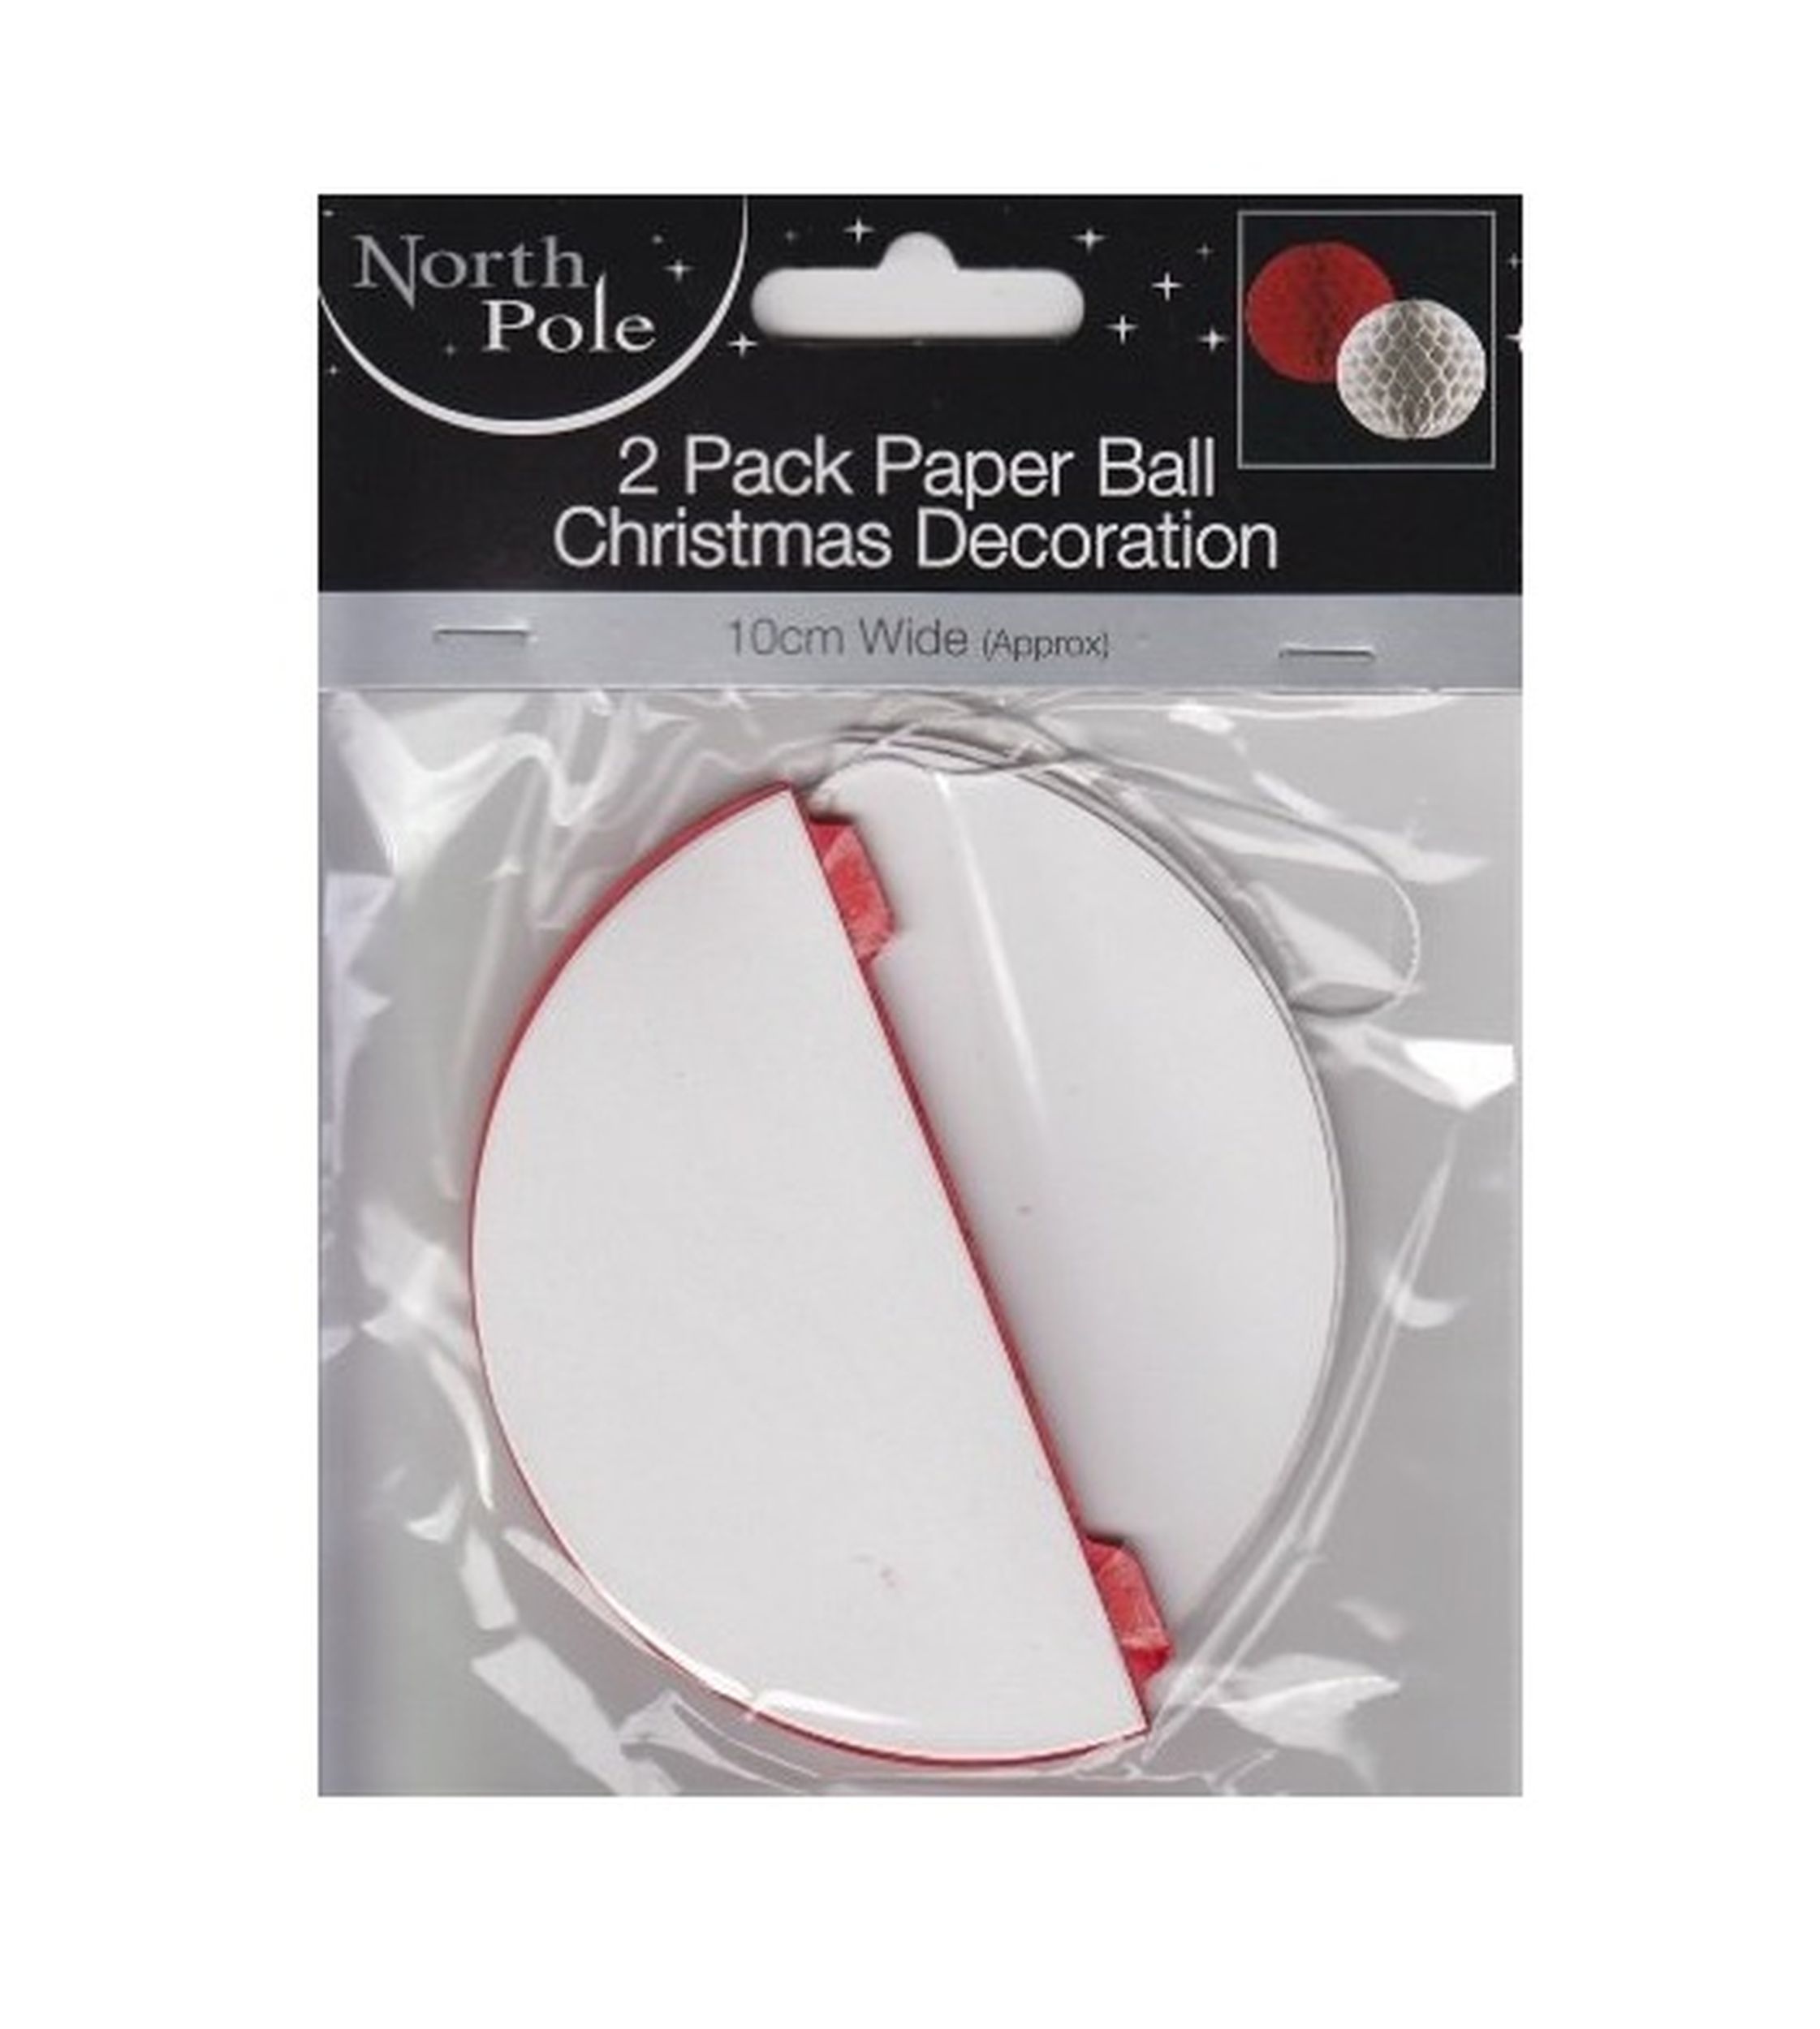 2 Pack Paper Ball Hanging Christmas Decoration - Red & White 10cm Wide Approx